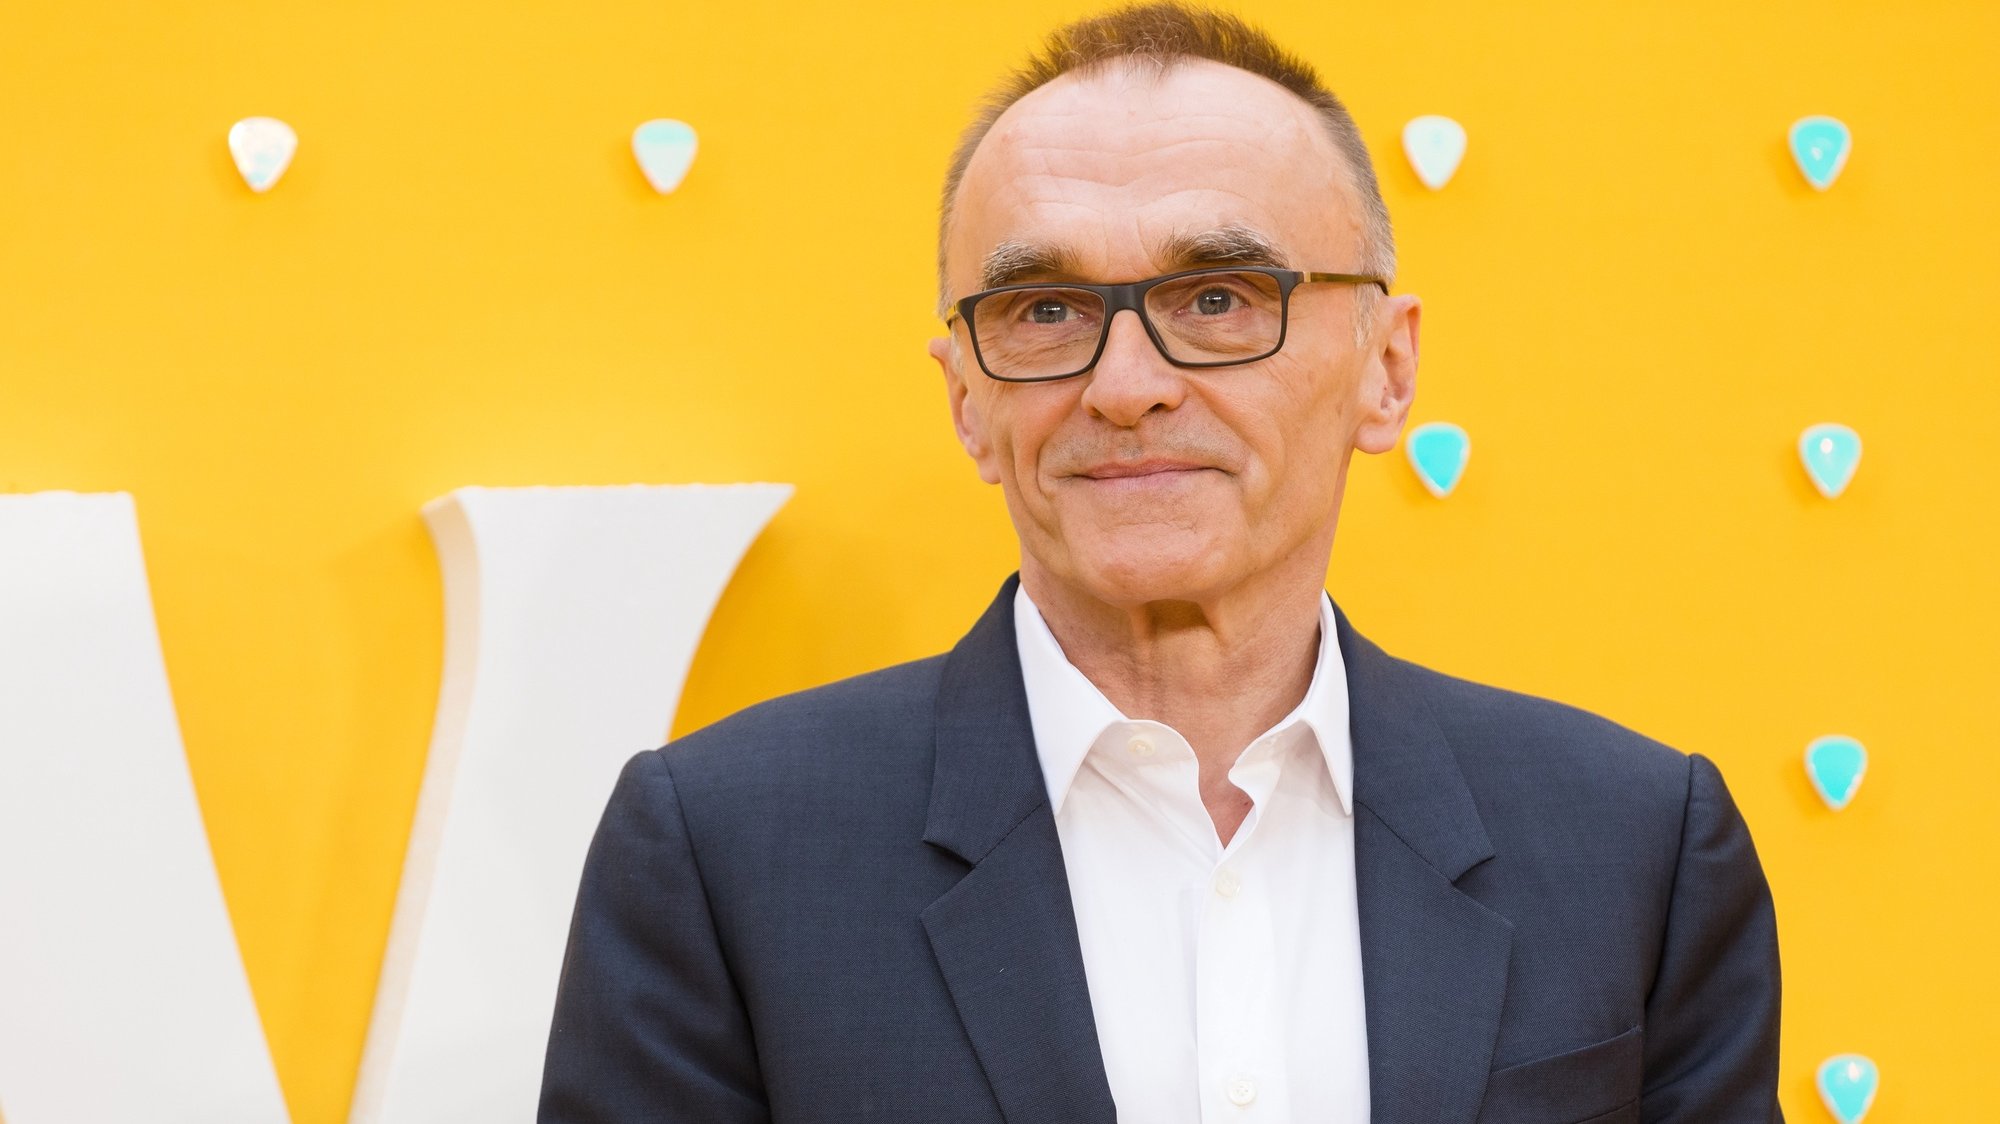 epa07656801 British director and producer Danny Boyle poses on the red carpet at the UK premiere of &#039;Yesterday&#039; at the Odeon Luxe Leicester Square in London, Britain, 18 June 2019. The film is released nationwide in Britain on 28 June 2019.  EPA/VICKIE FLORES